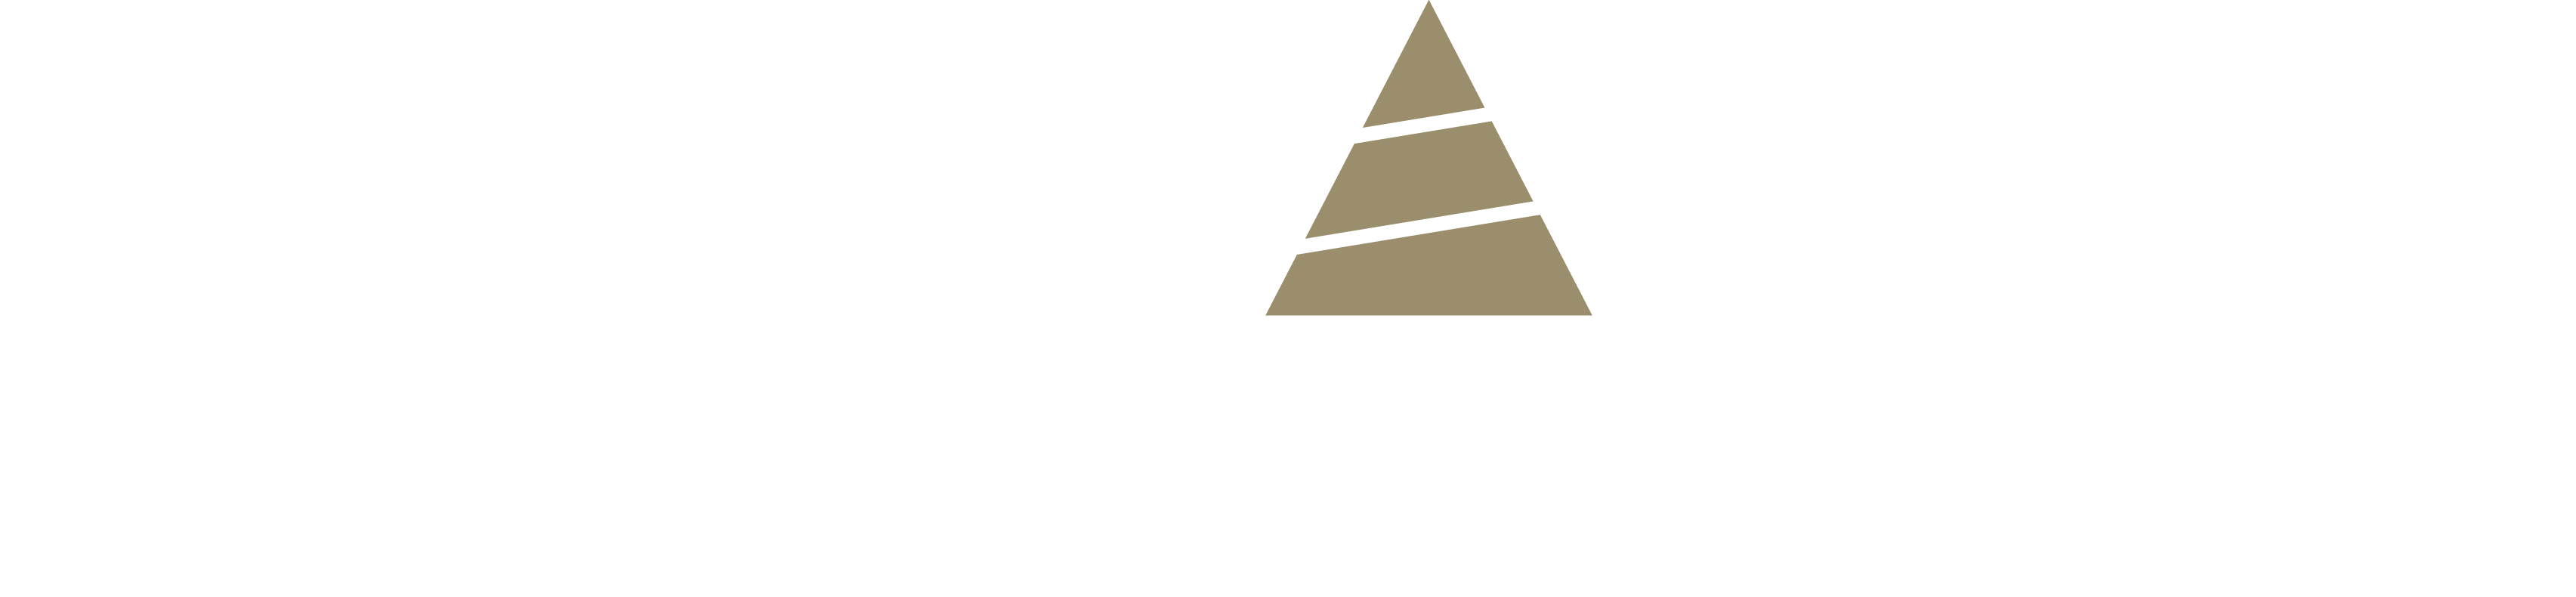 Elevated-Coaching-Systems-Logo_White-Gold